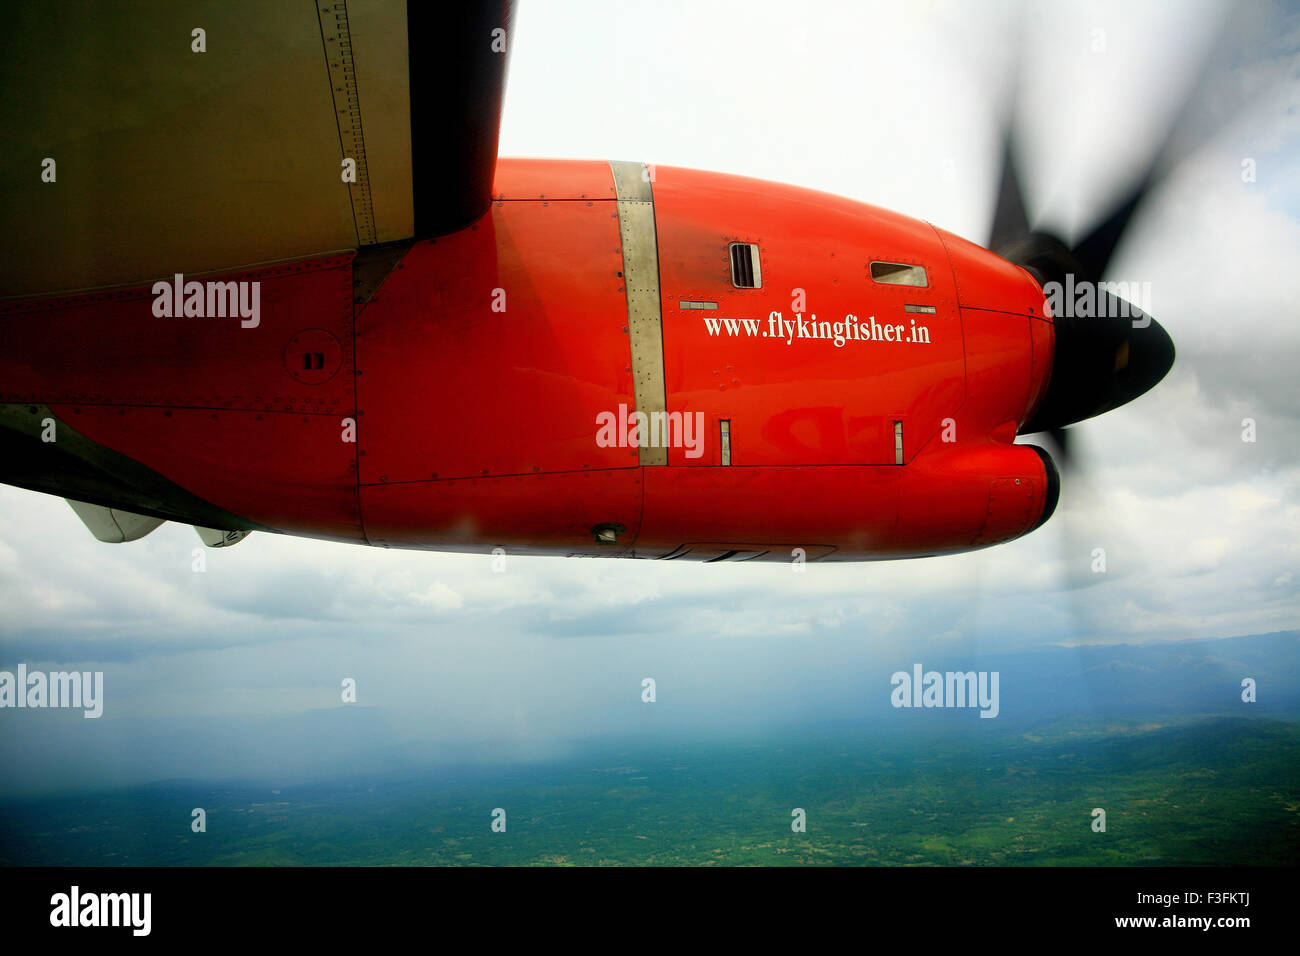 Kingfisher airlines aerial shot taken from inside flight ; Kerala ; India Stock Photo